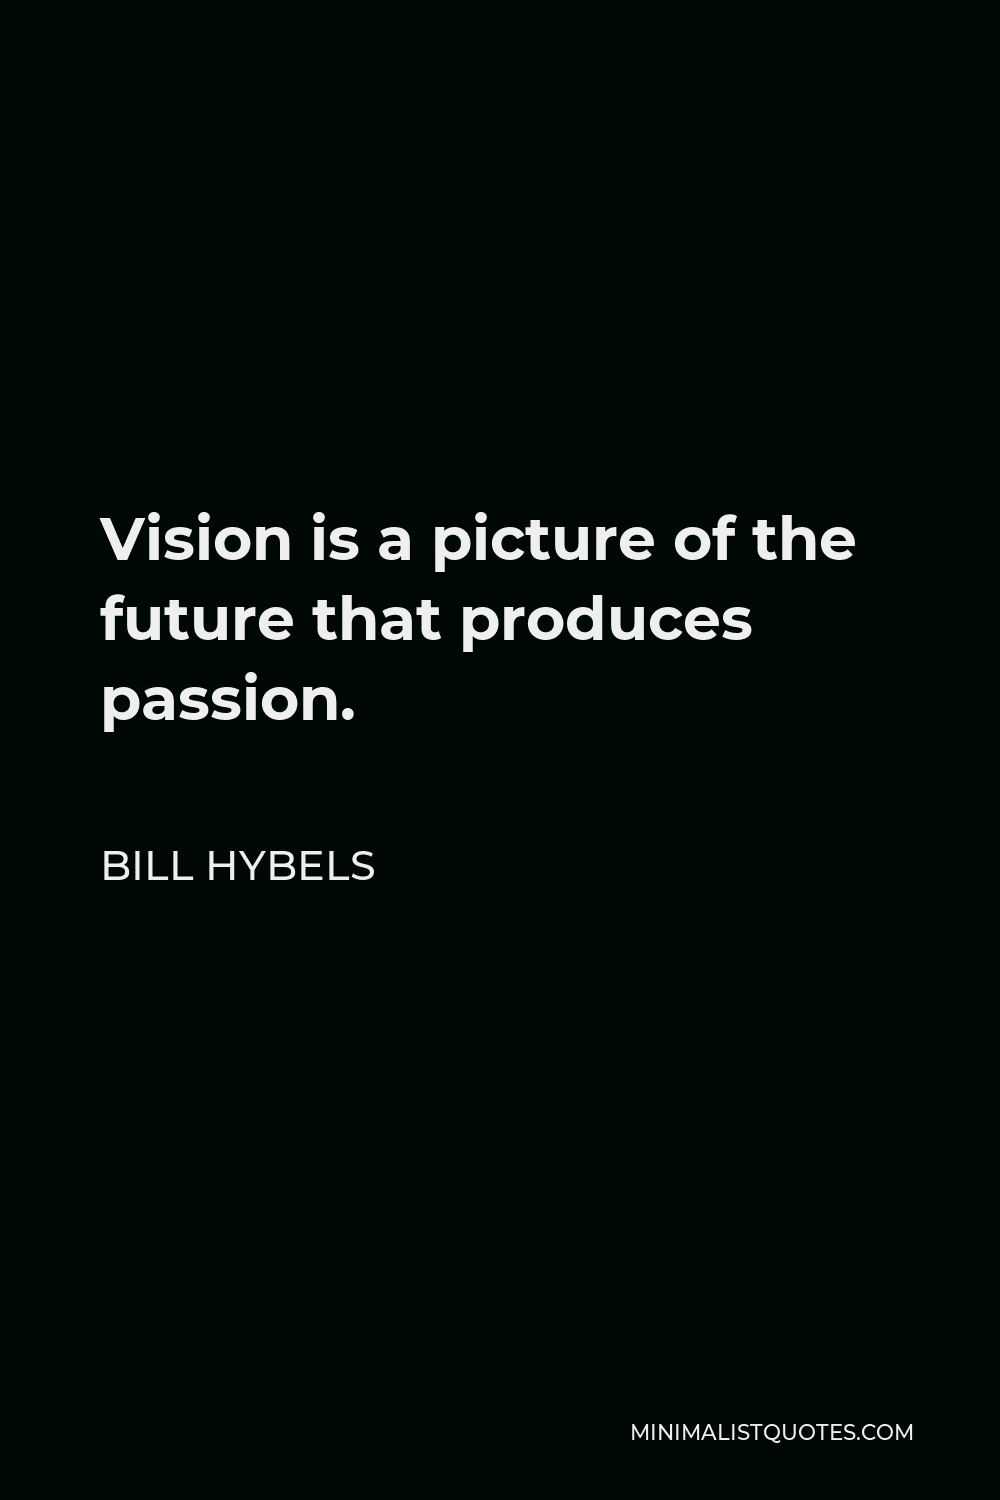 Bill Hybels Quote - Vision is a picture of the future that produces passion.